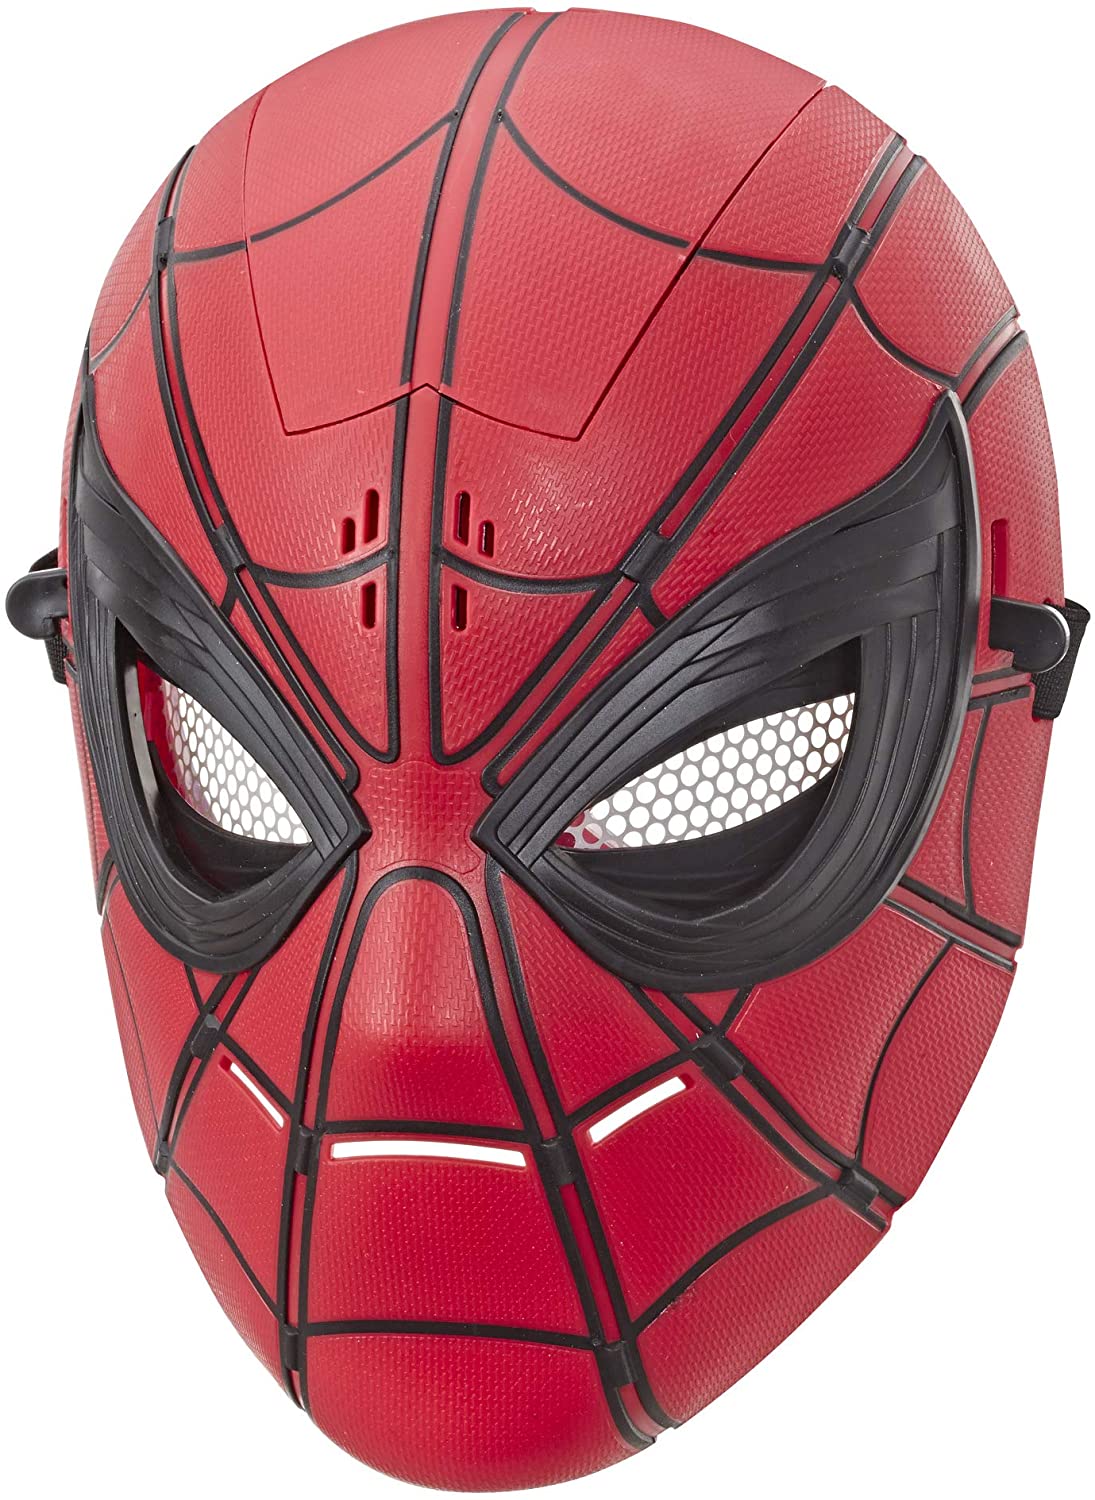 Hasbro Spider-Man Marvel Far from Home Spider FX Mask for Roleplay – Super Hero Mask Toy - Red